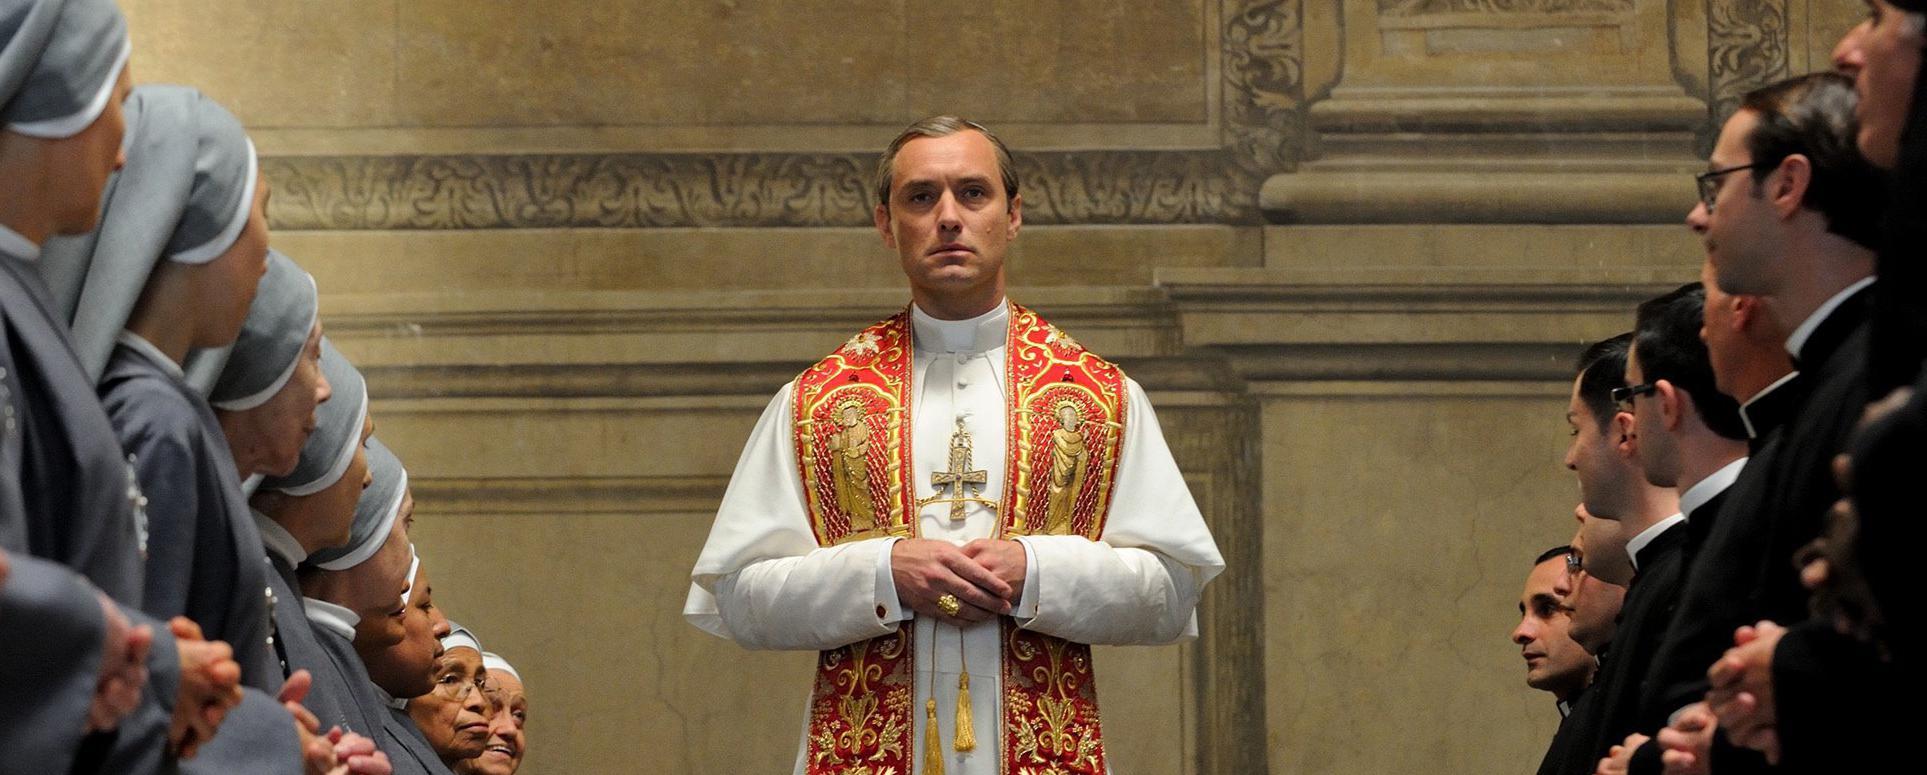 youngpope10